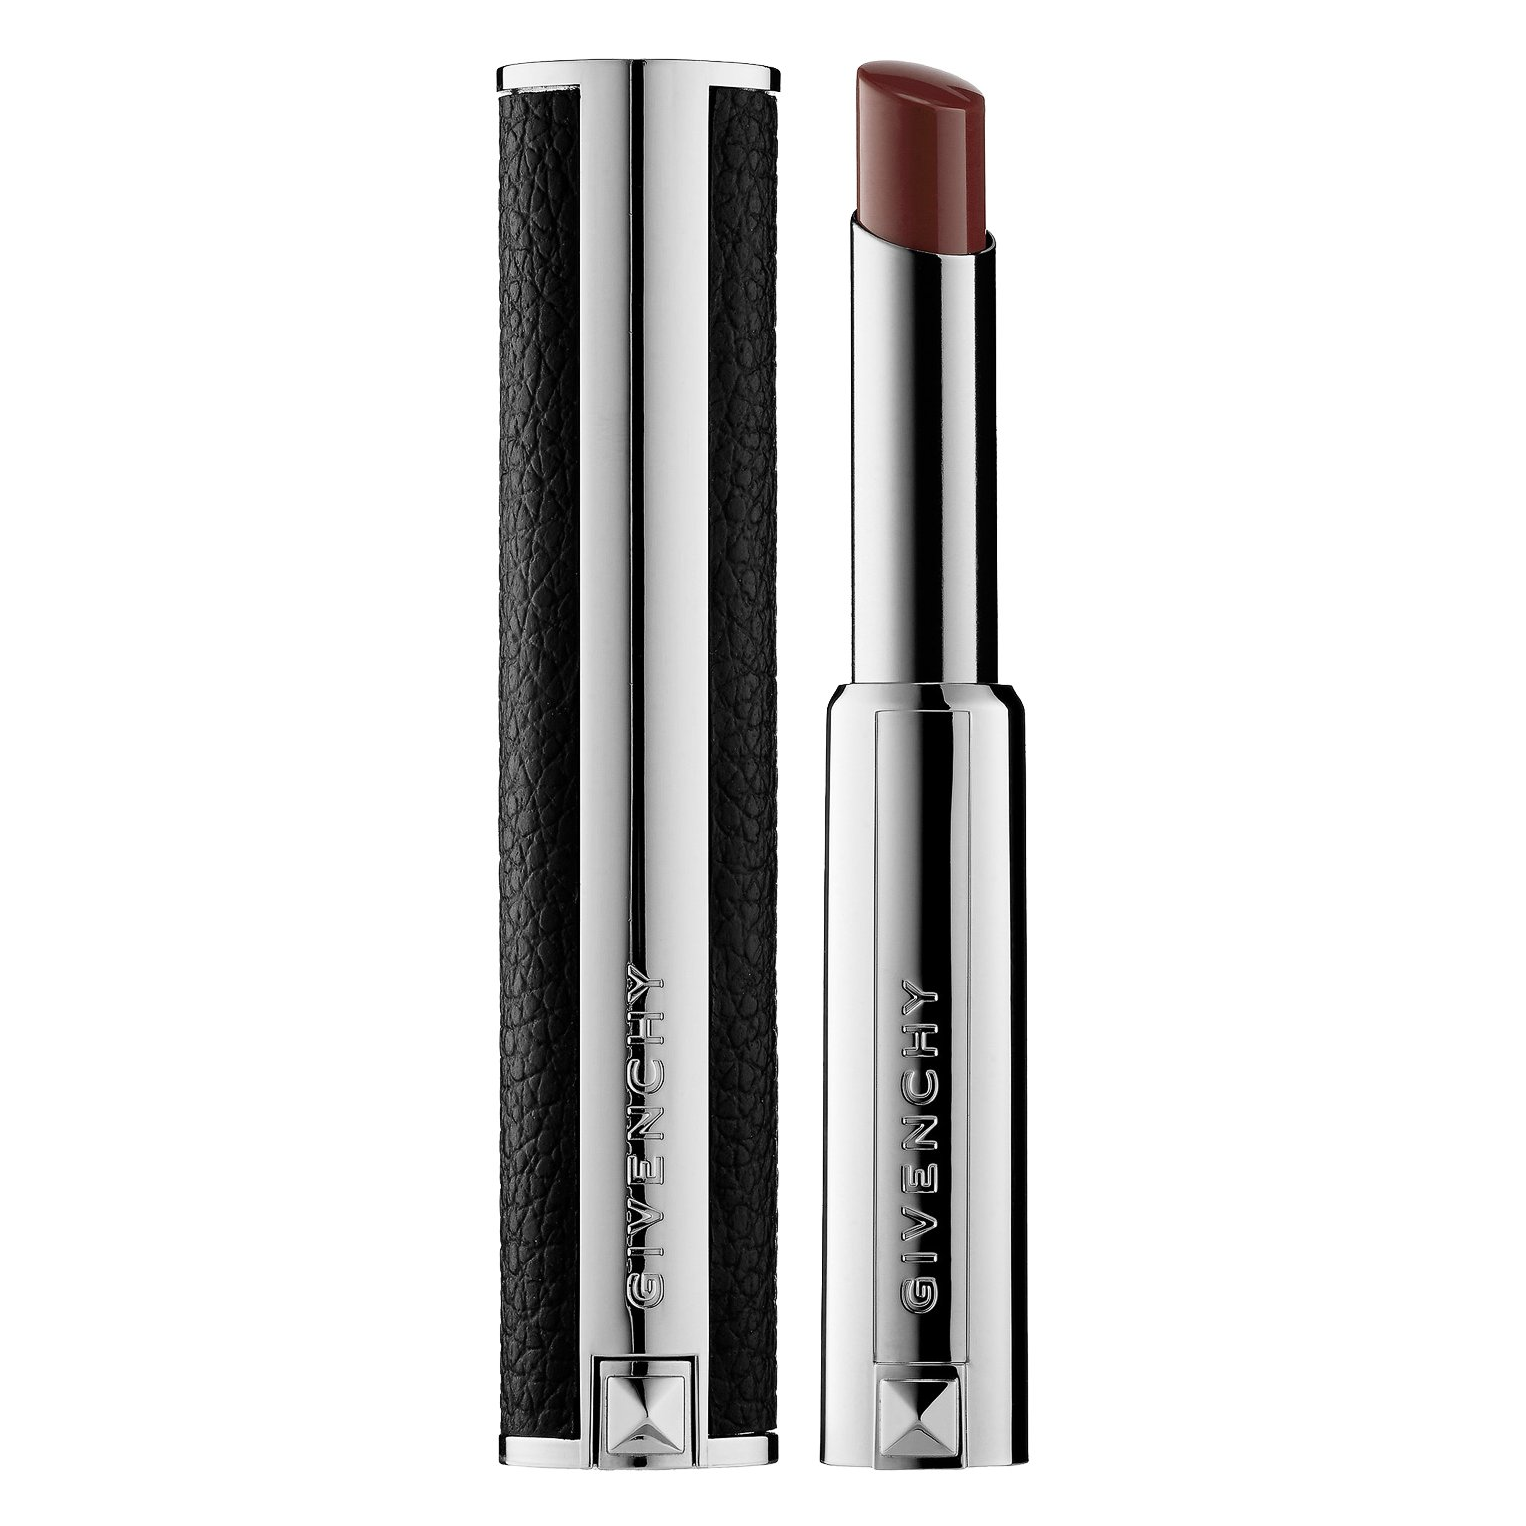 Губная помада givenchy. Givenchy губная помада le rouge a Porter 103. Givenchy le rouge 304. Помада Givenchy Parme silhouette 106. Помада Givenchy le rouge.